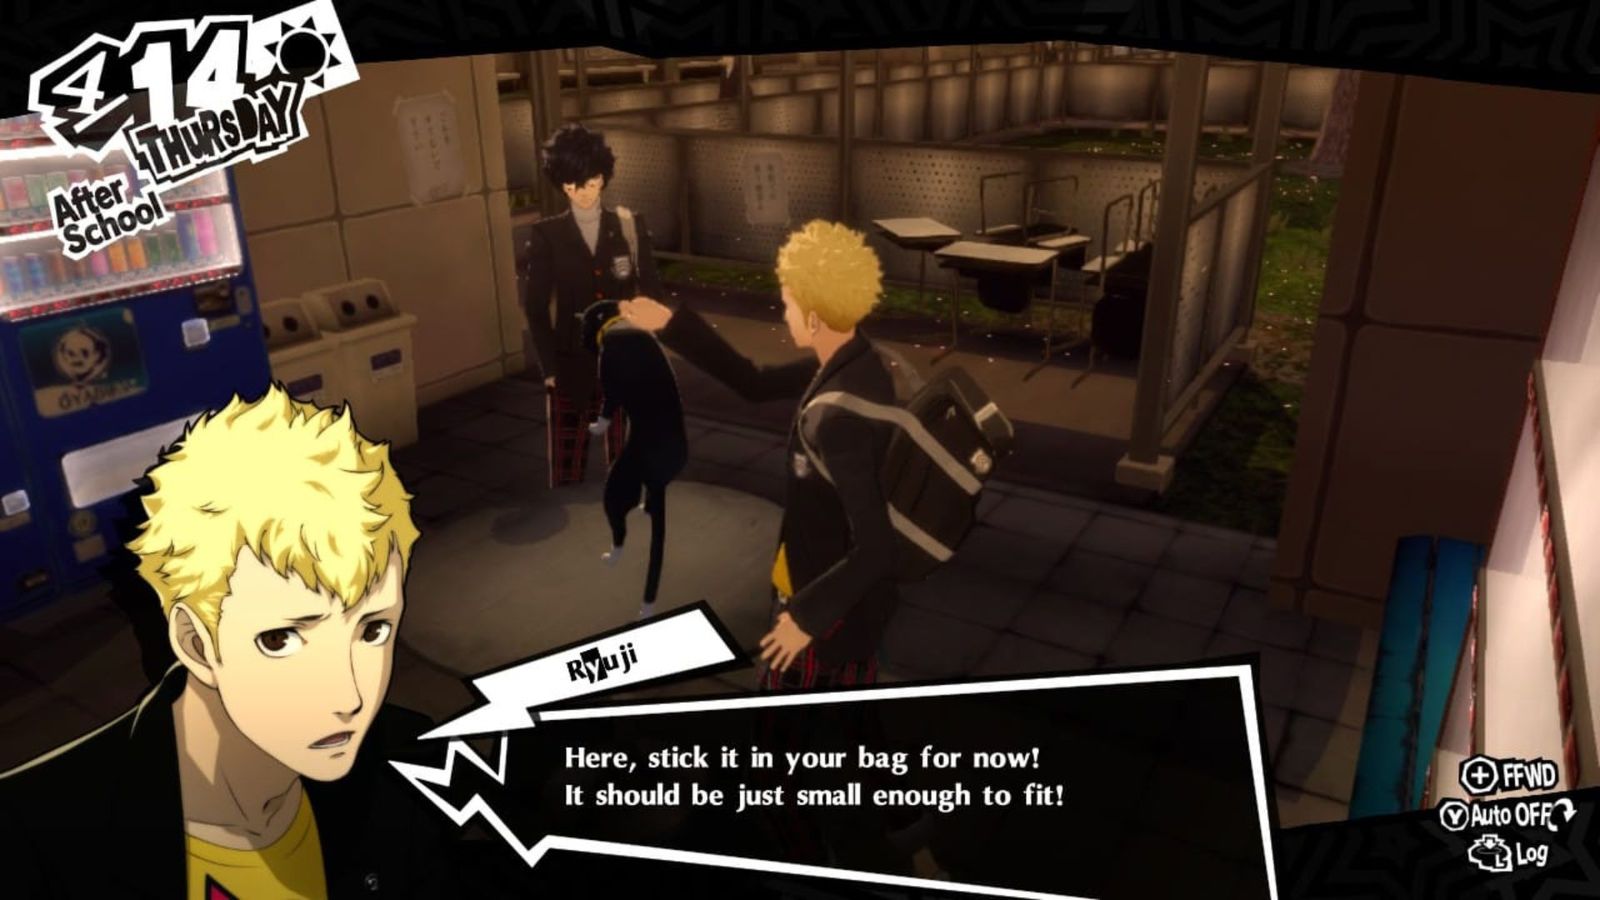 Persona 5 Royal Nintendo Switch review - The portable thieves of hearts